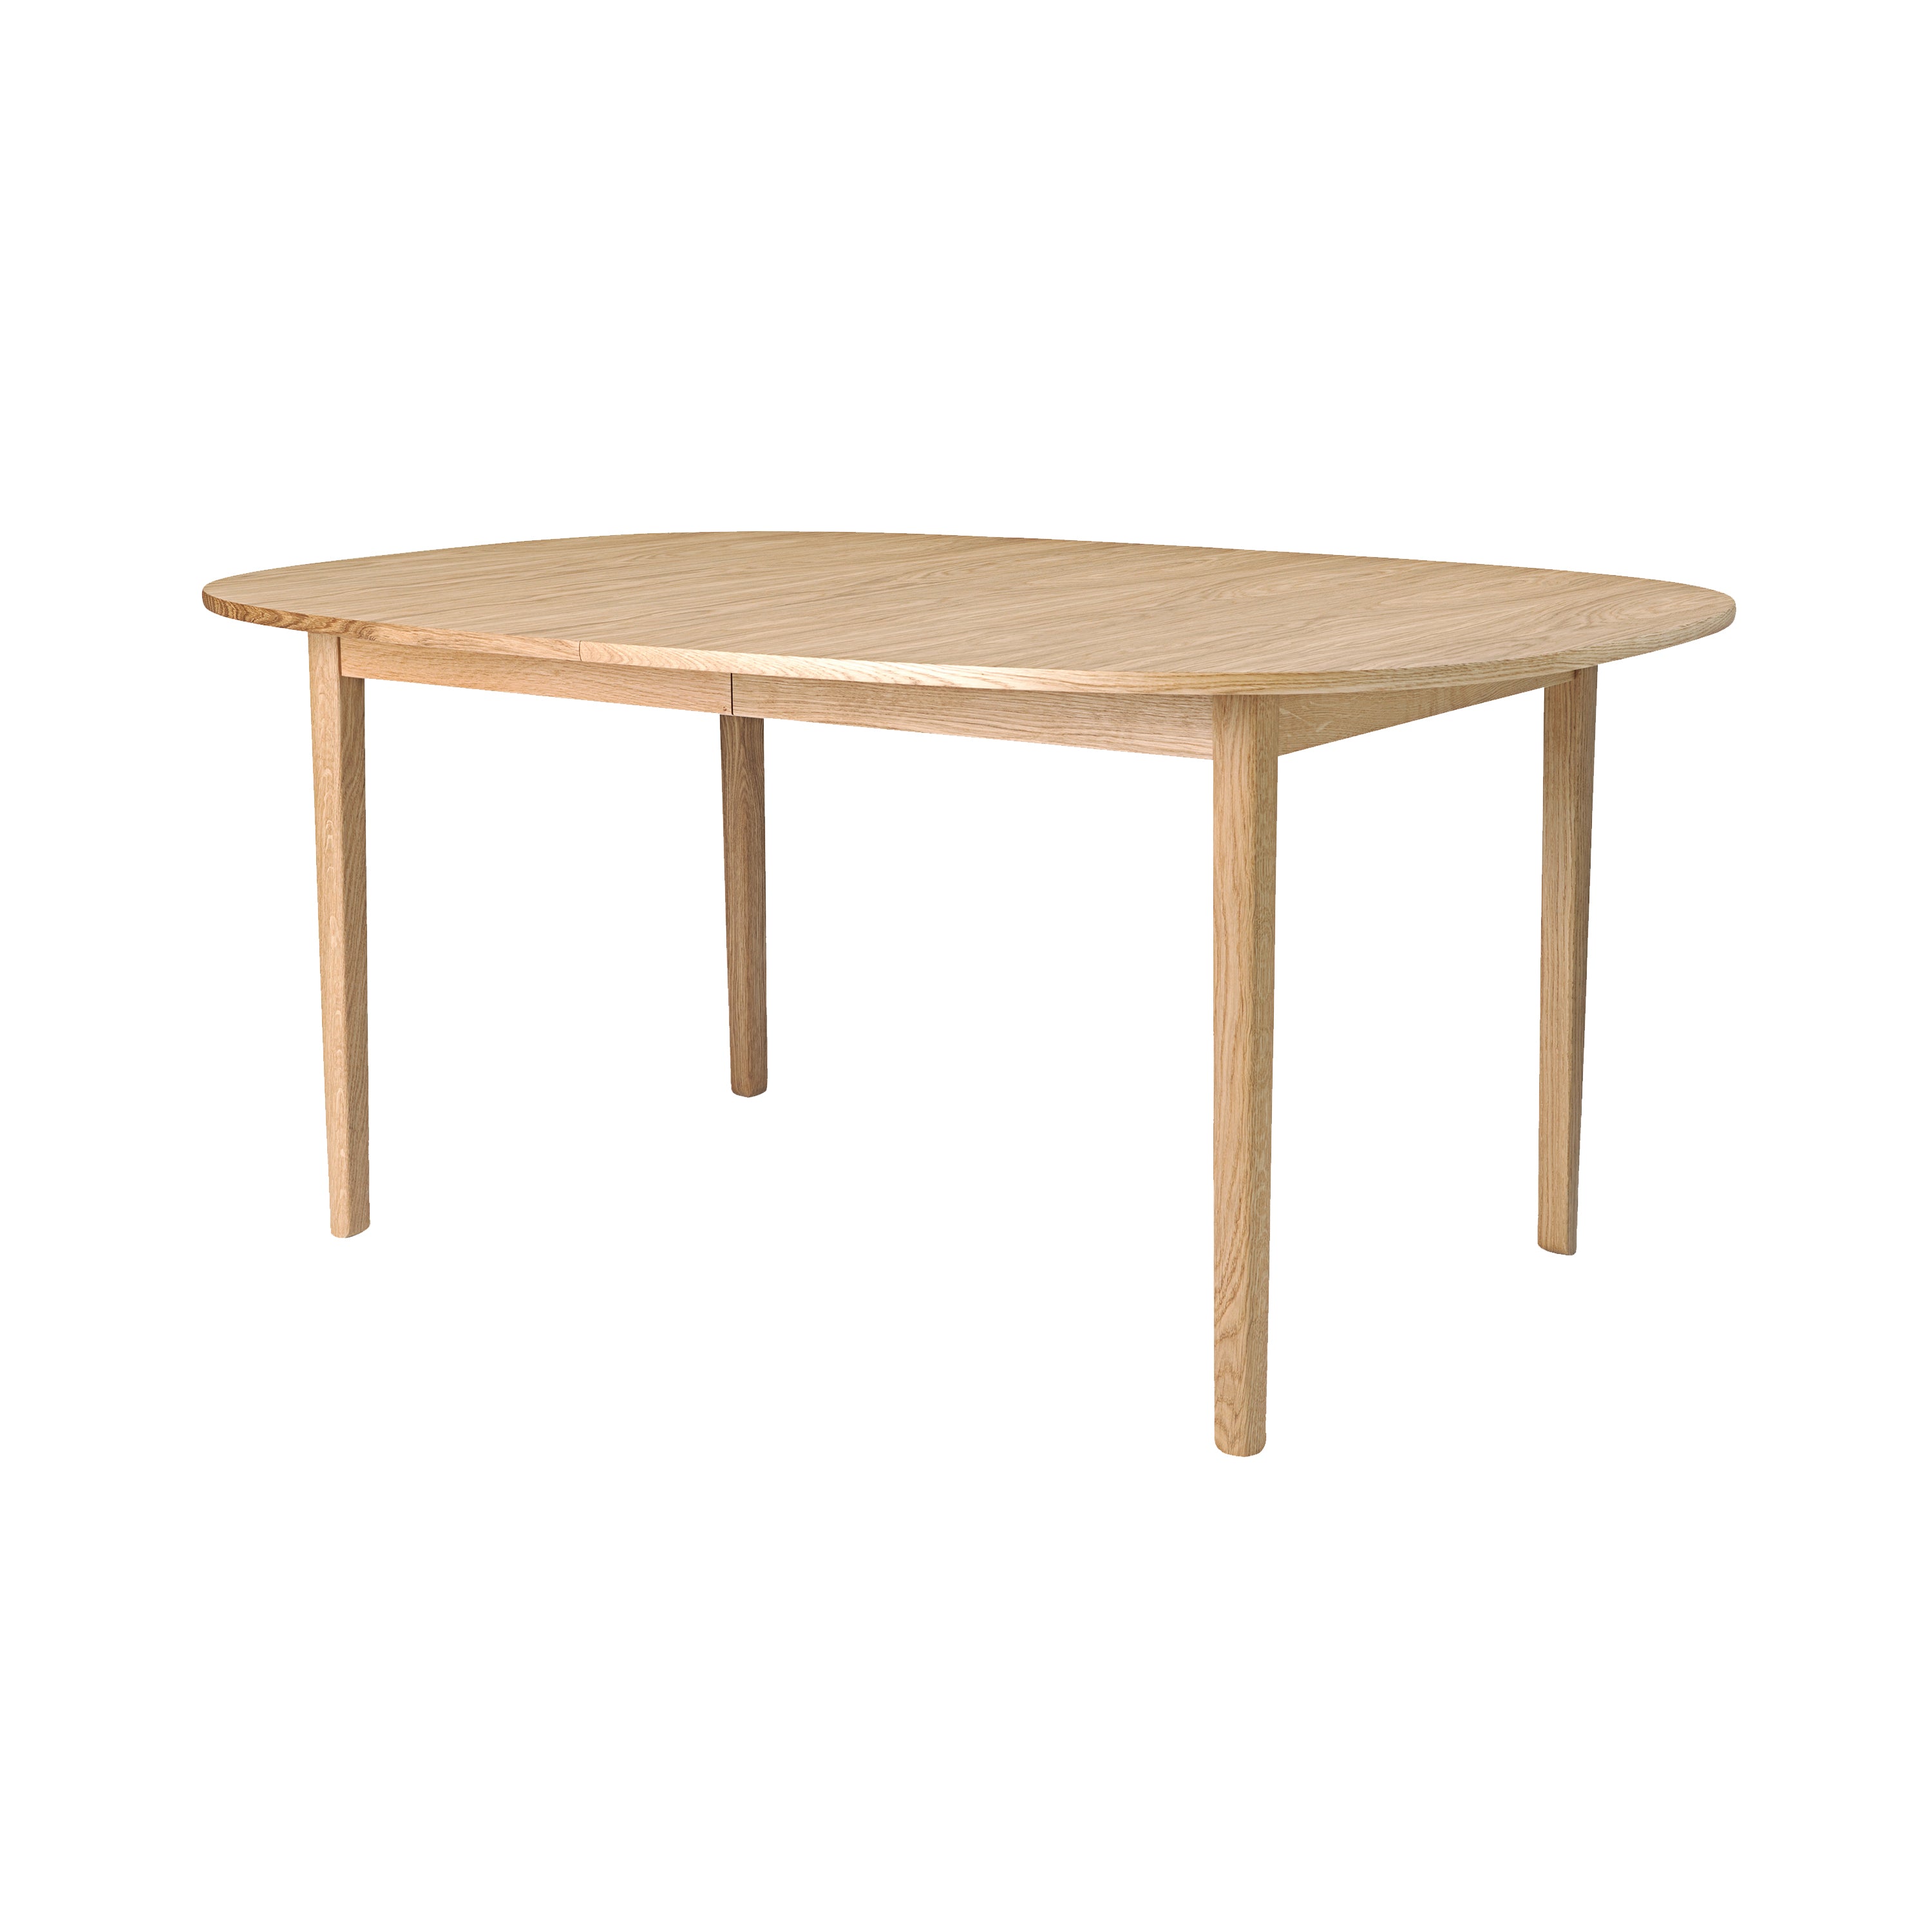 OW224 Table: Oiled Oak + Without Extension